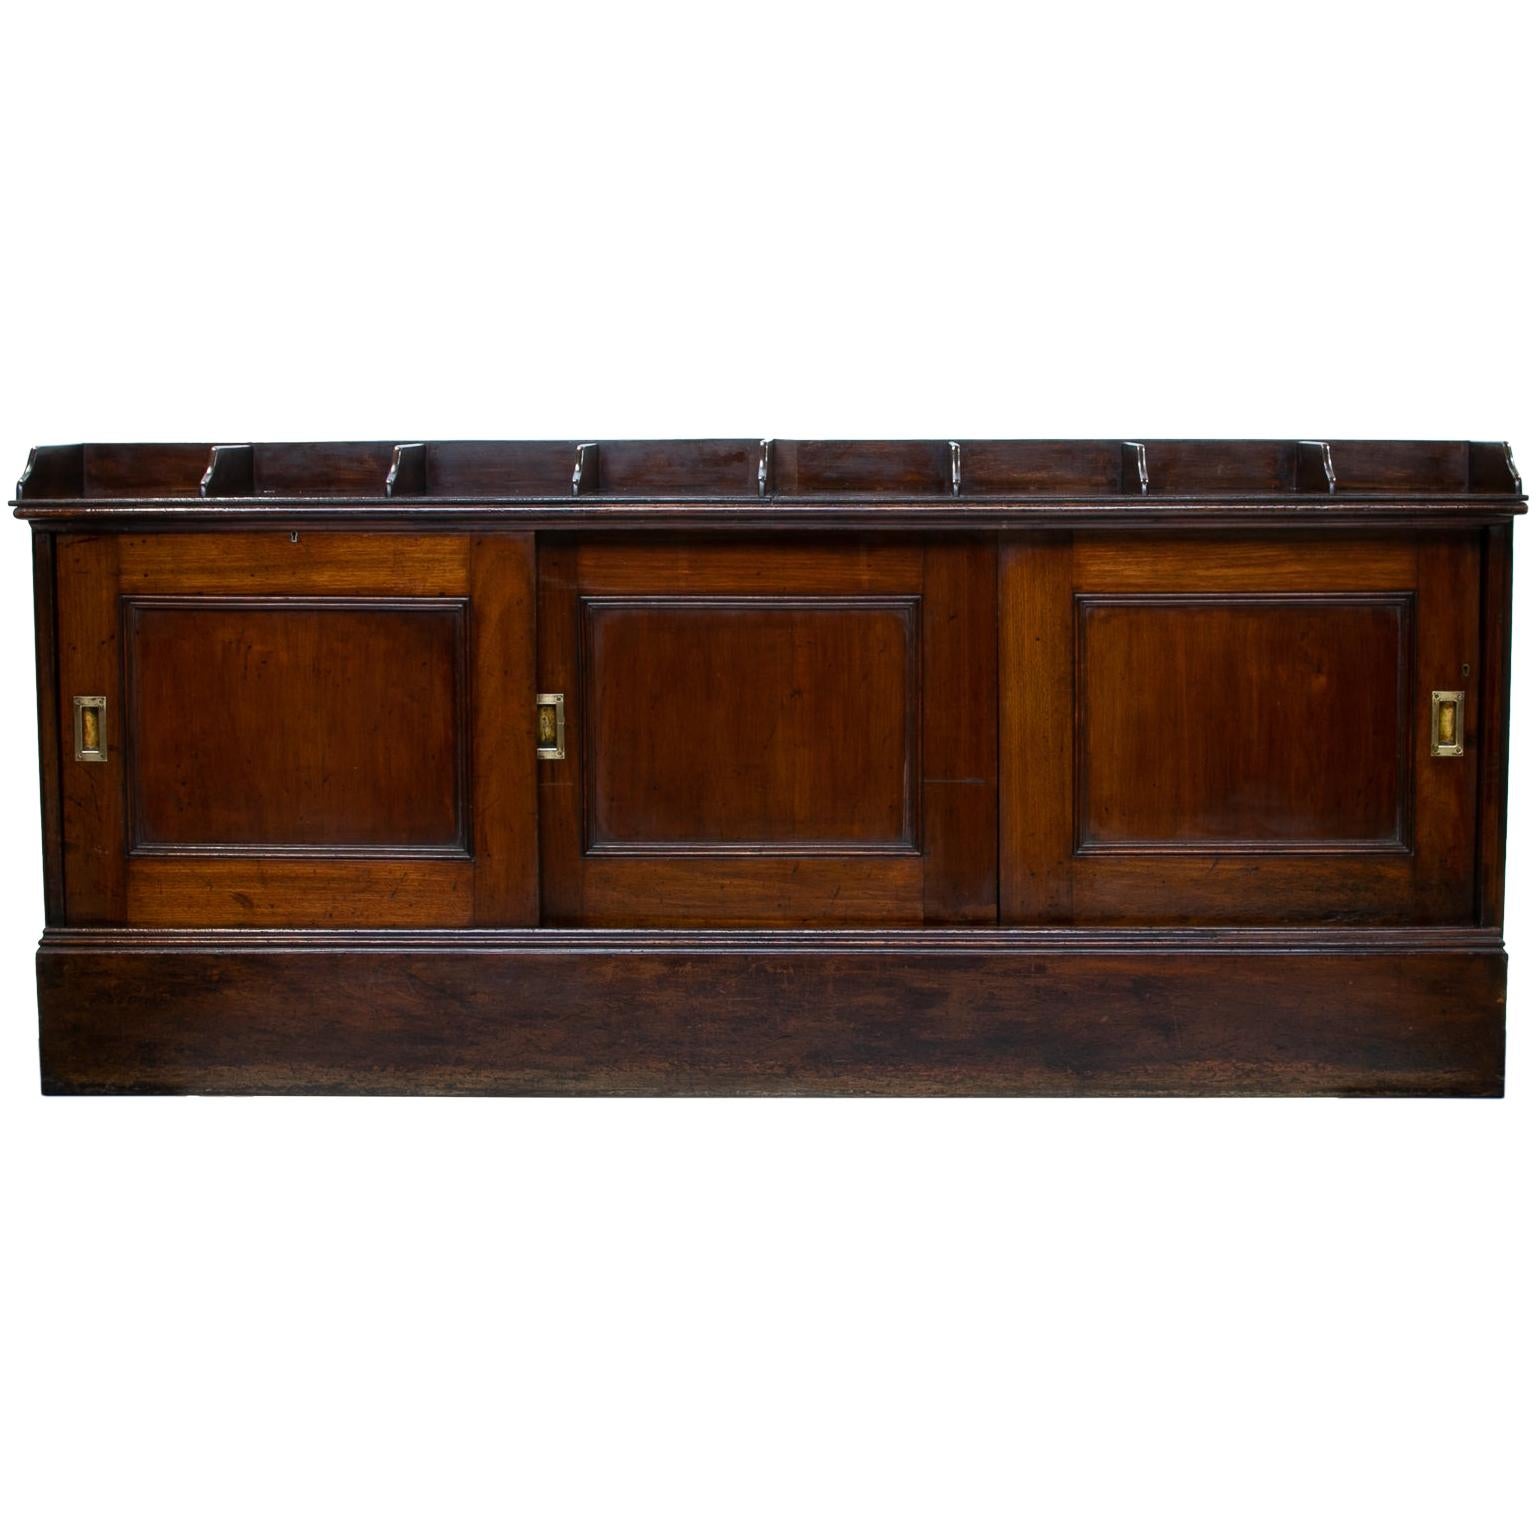 English Office Cabinet or Shops Cabinet, circa 1910